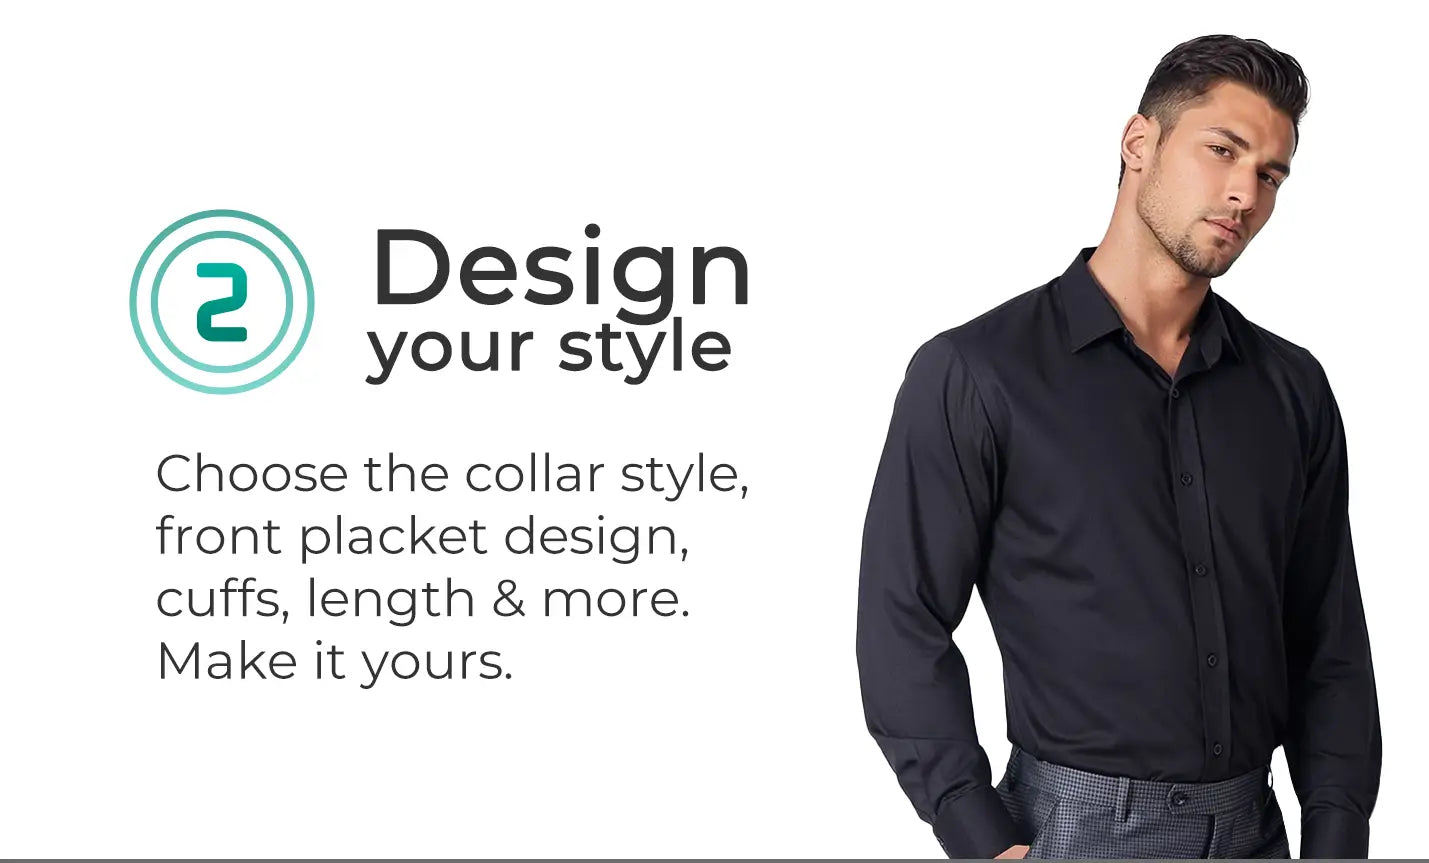 Design your style. Choose the collar style, front placket design, cuffs, length & more. Make it yours.